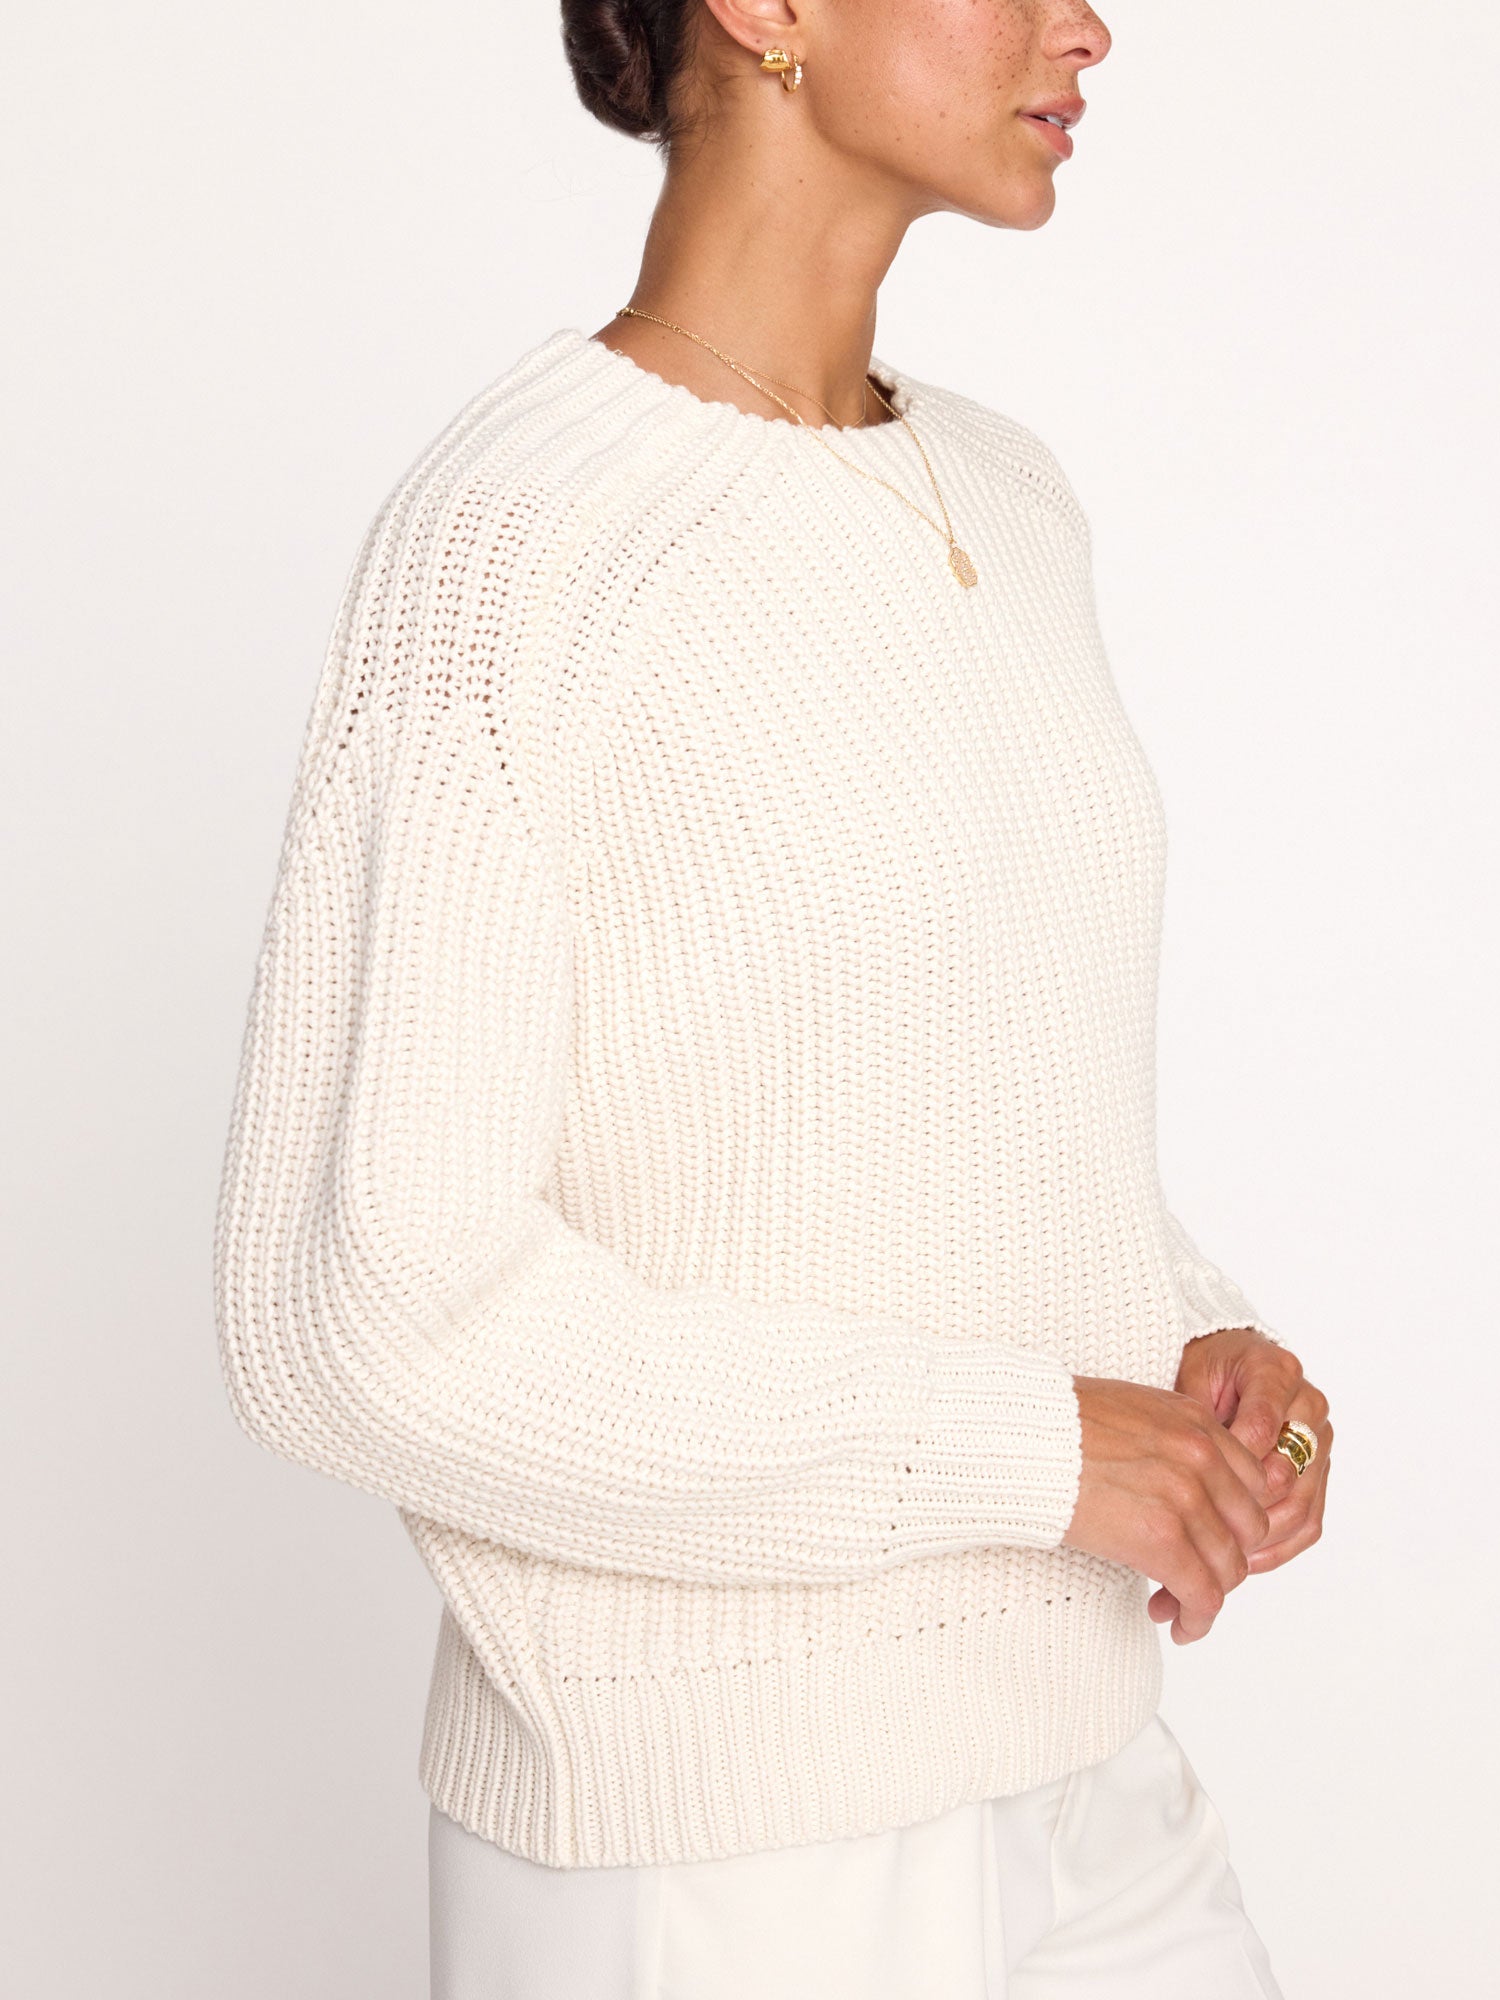 Beckett Pullover off-white sweater side view